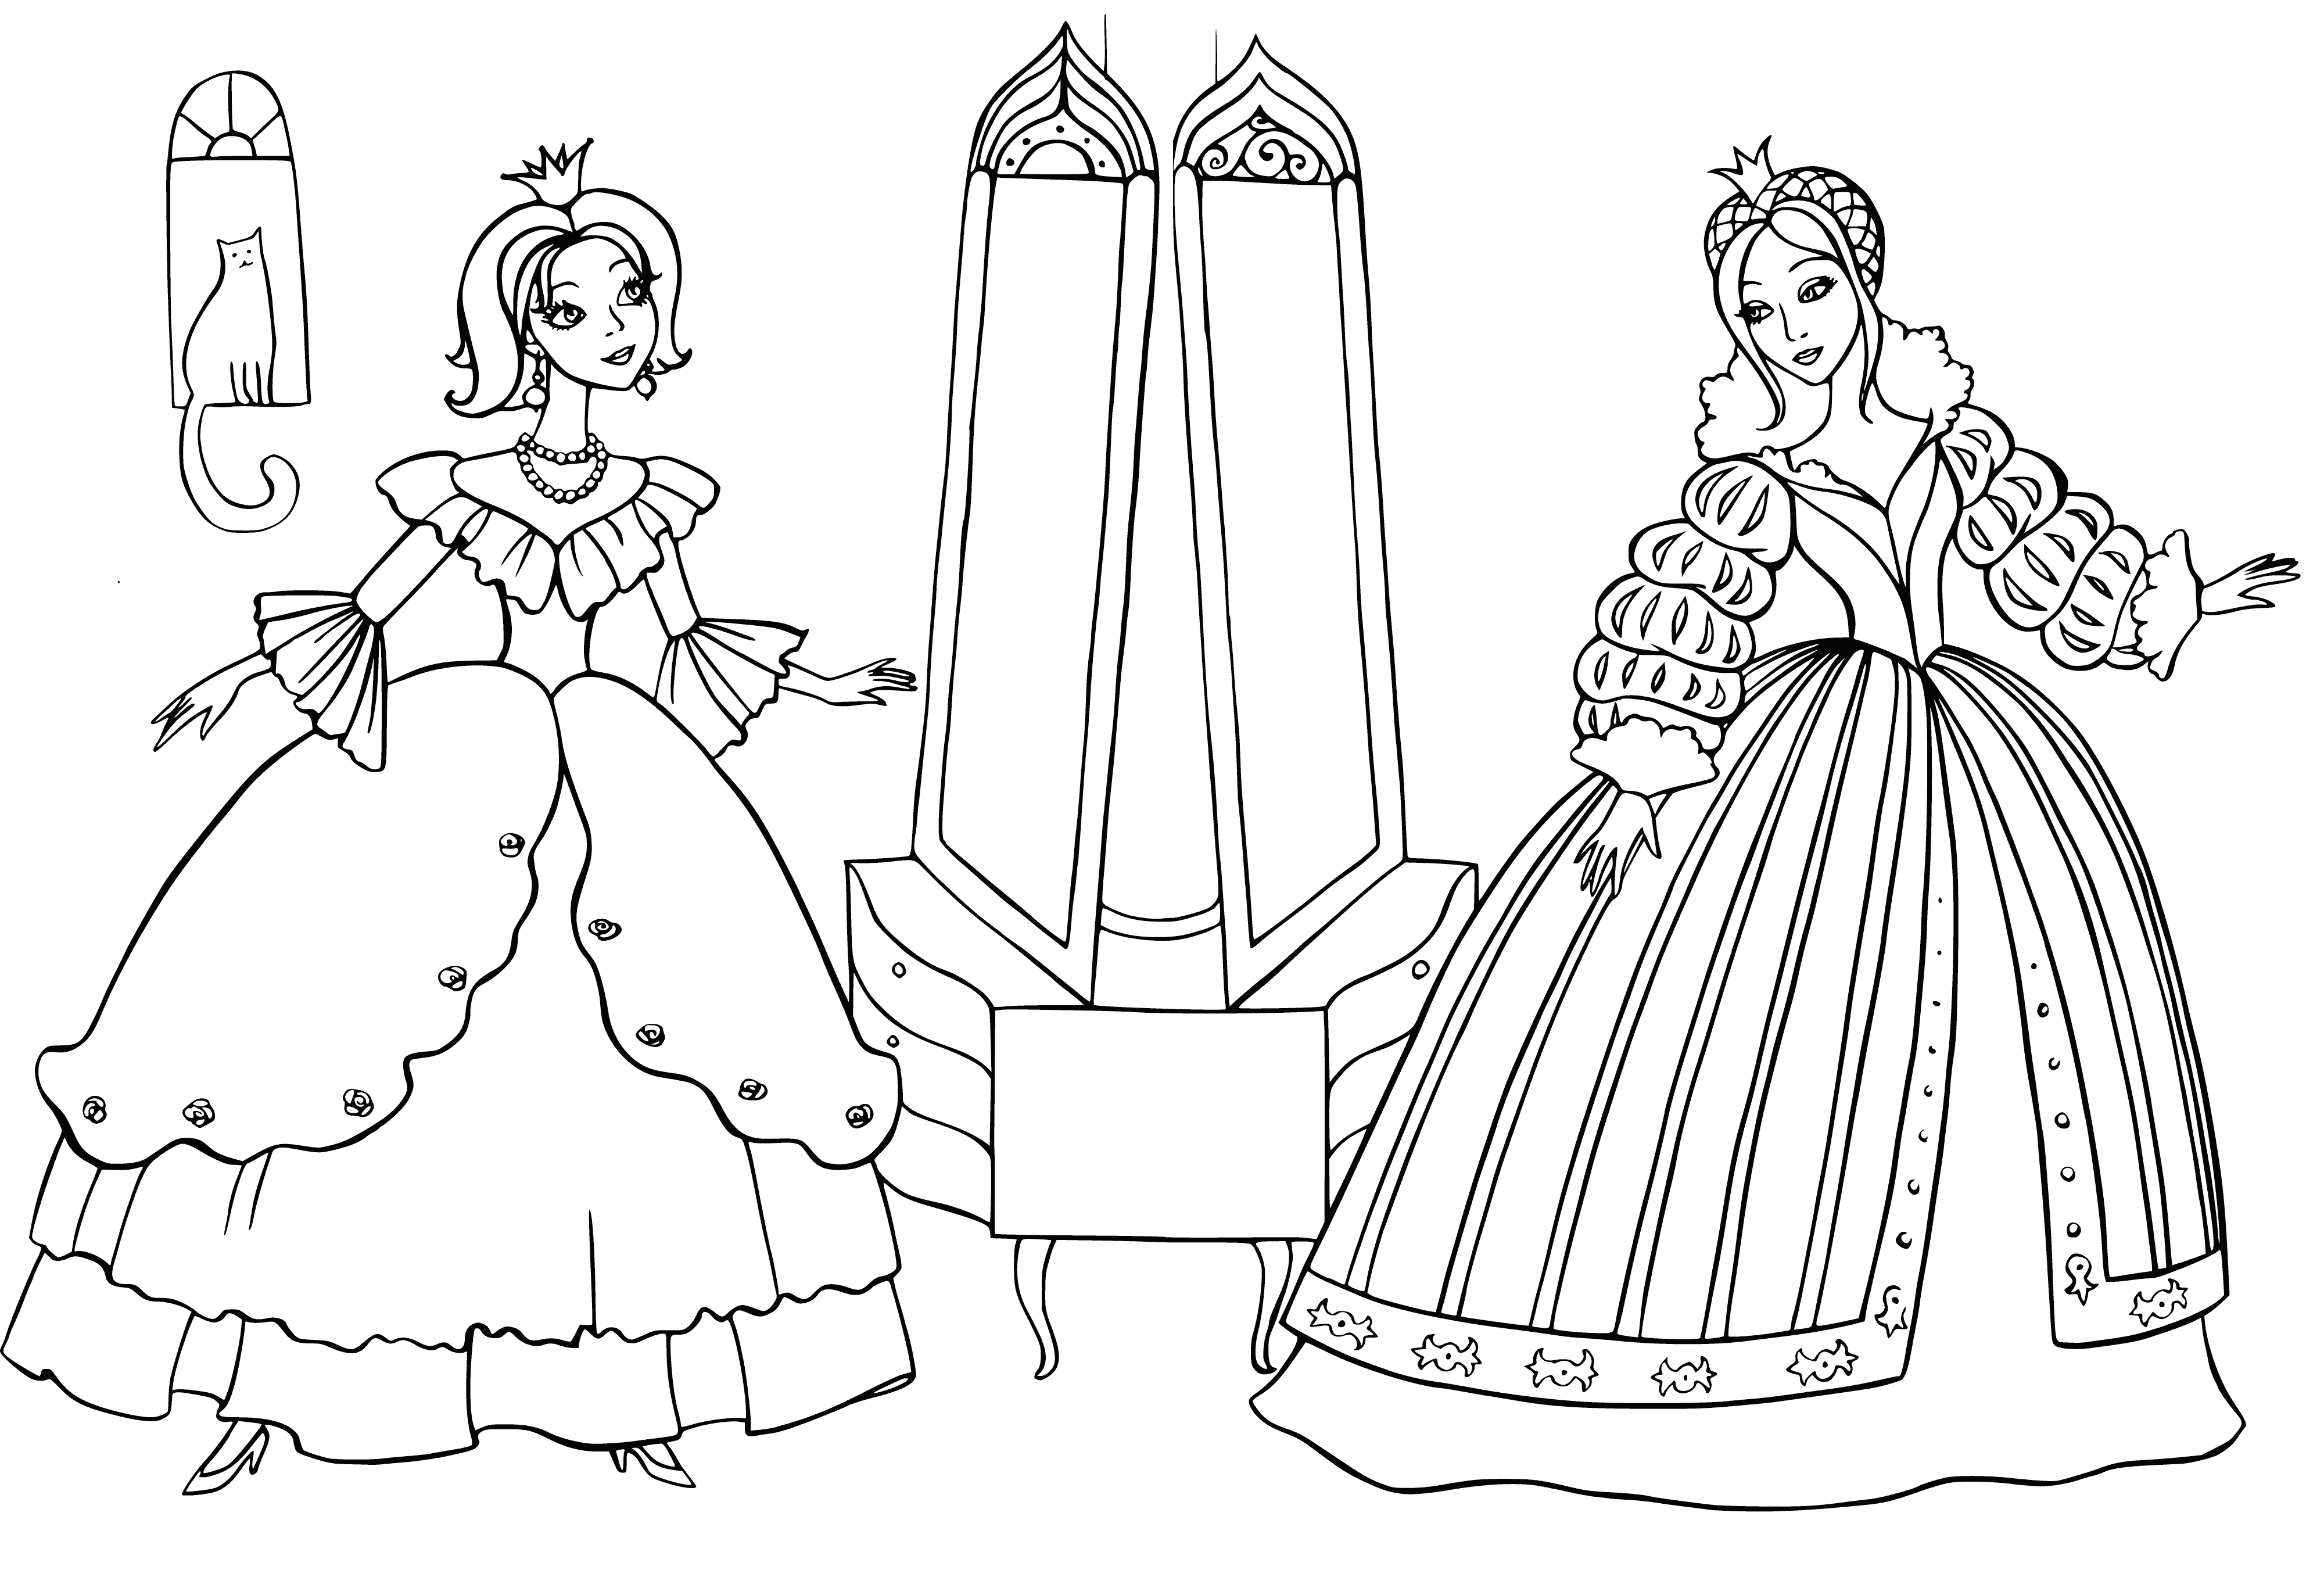 coloring page: Fairies fly around in pretty dresses, different colors and styles, each with wings and unique shoes.